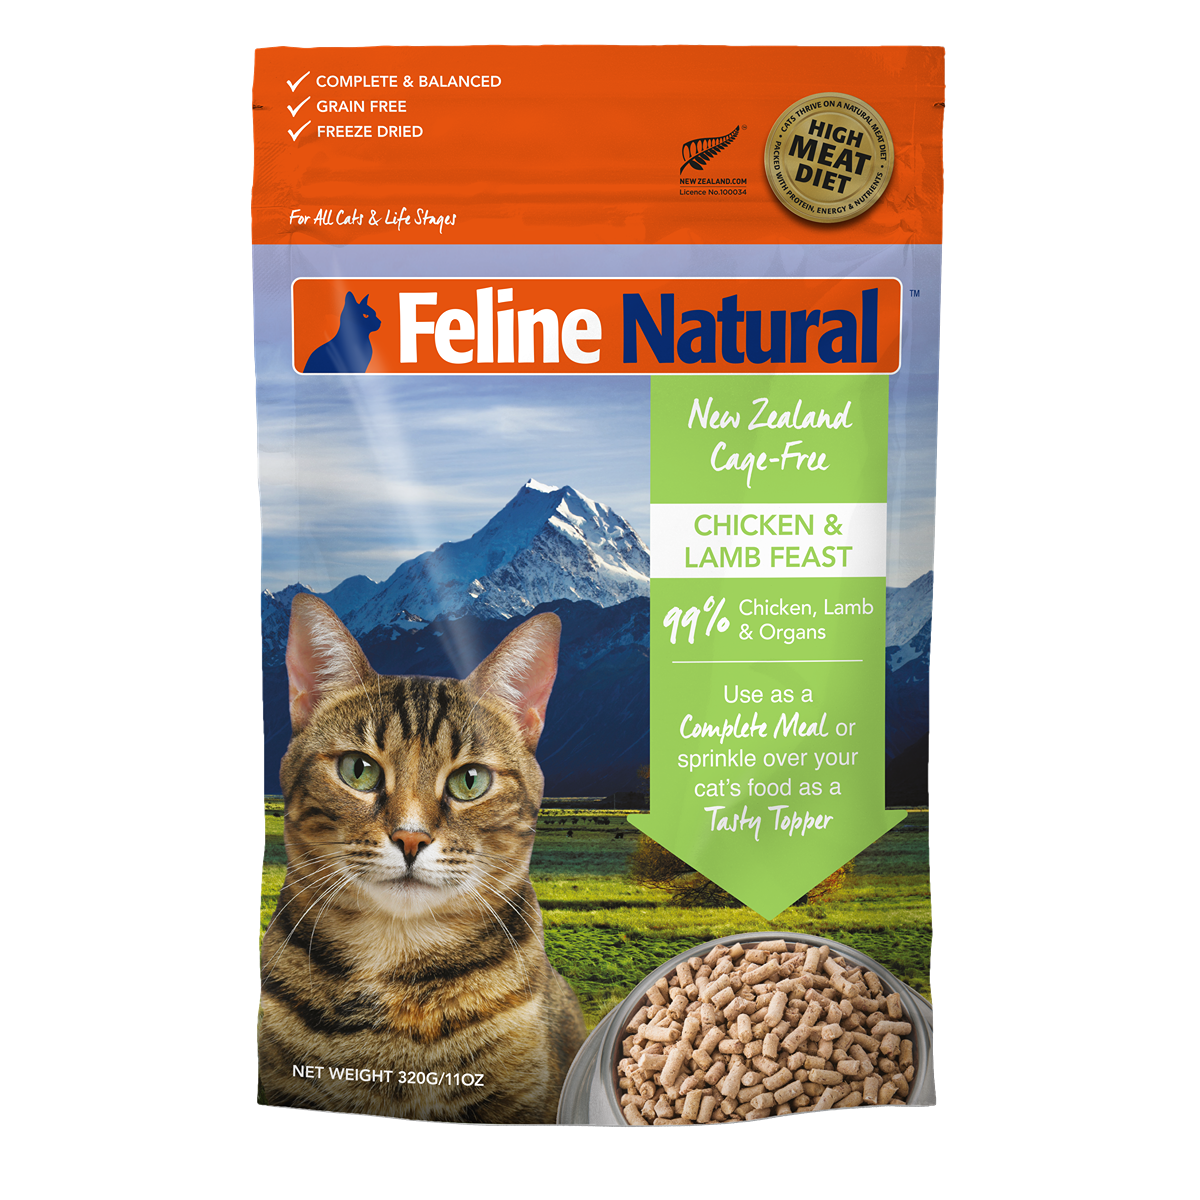 Feline Natural Cat Food Chicken and Lamb Feast